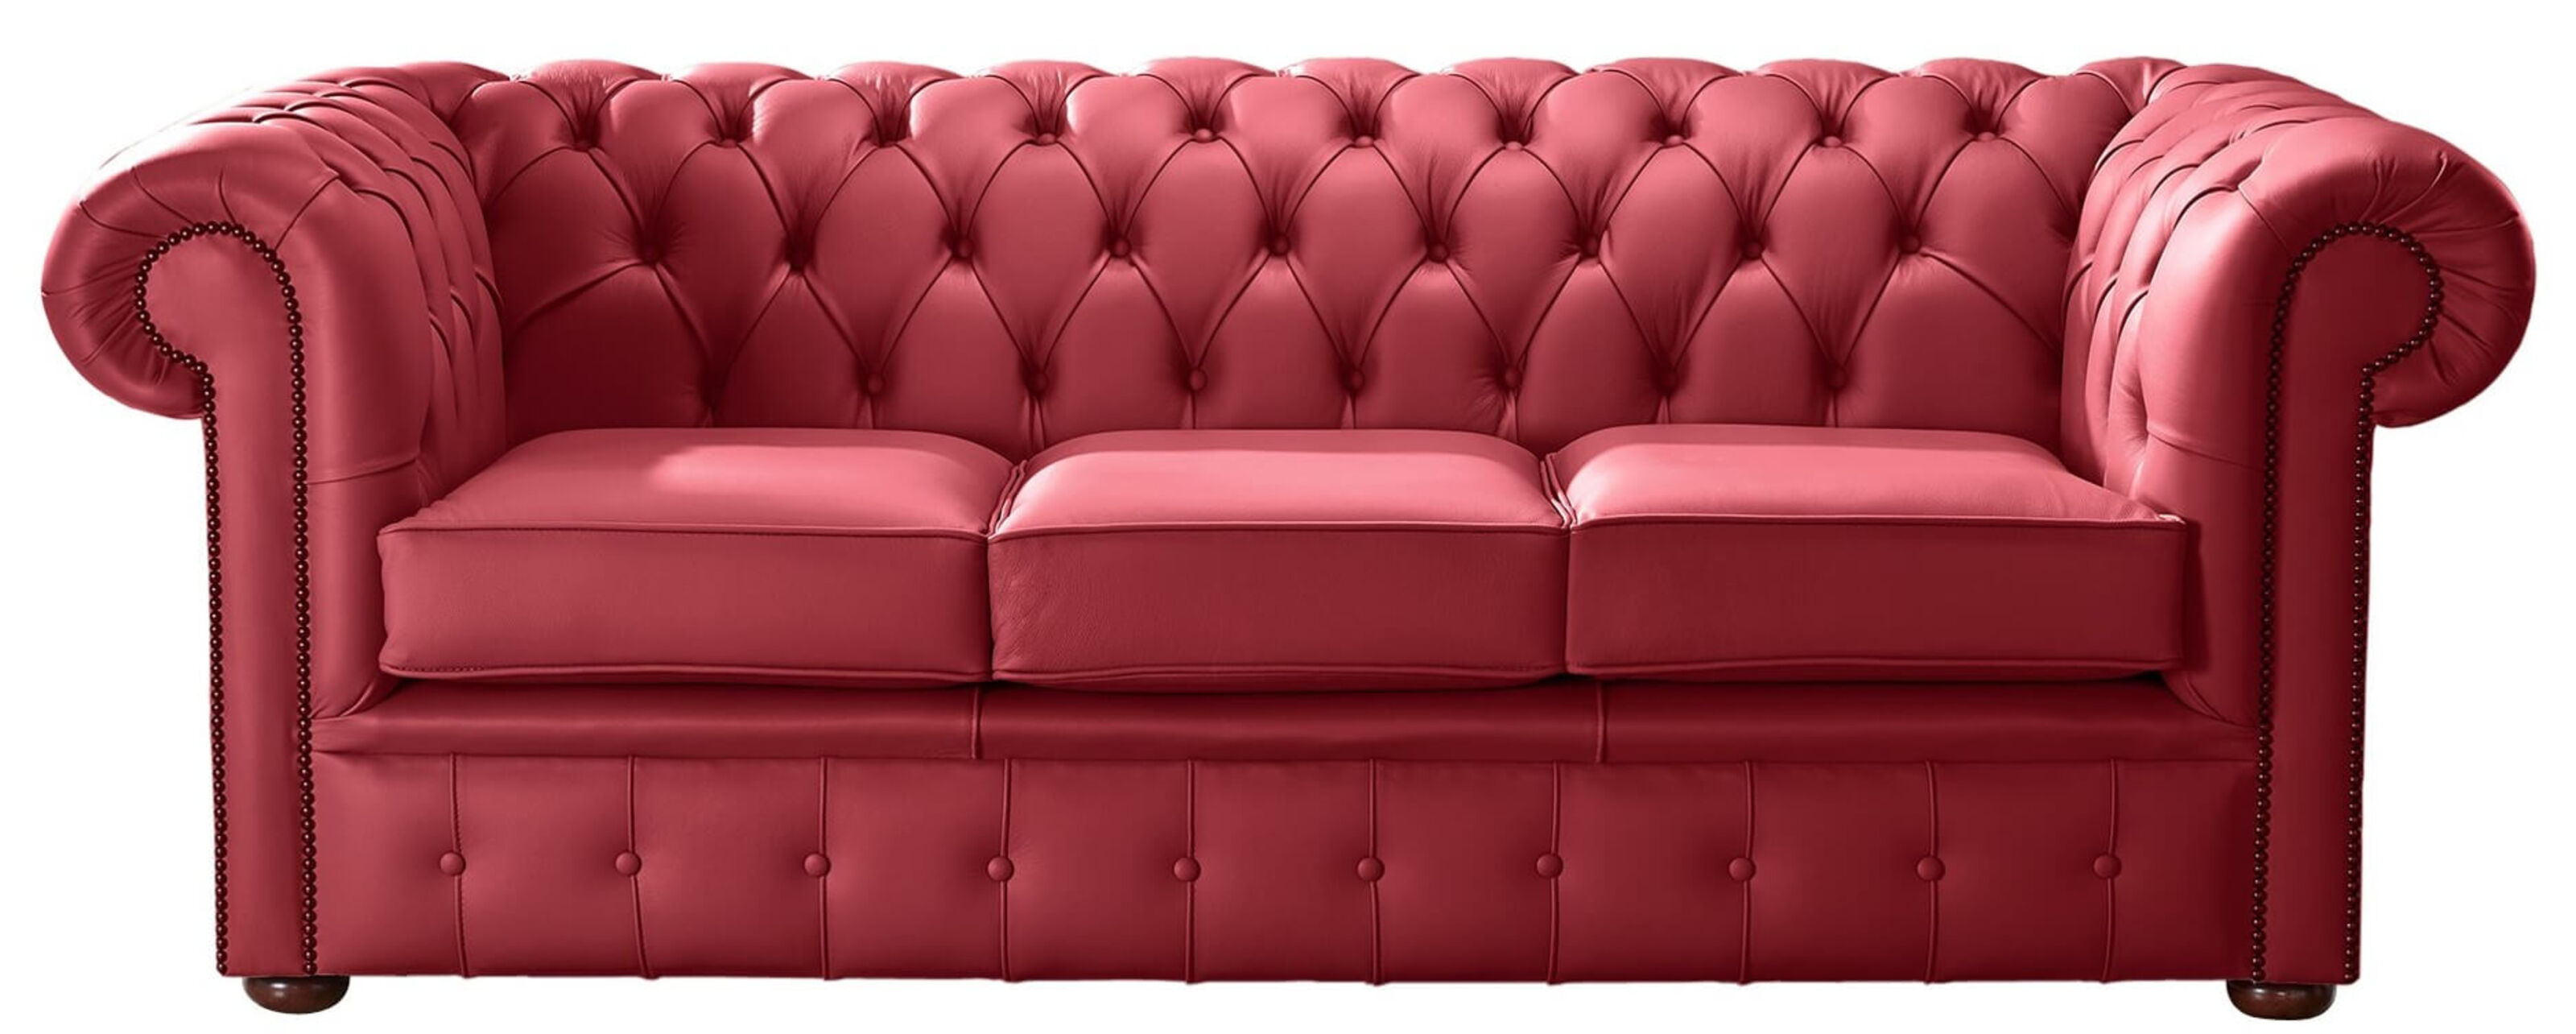 Exploring Varieties Different Styles of Chesterfield Sofas  %Post Title